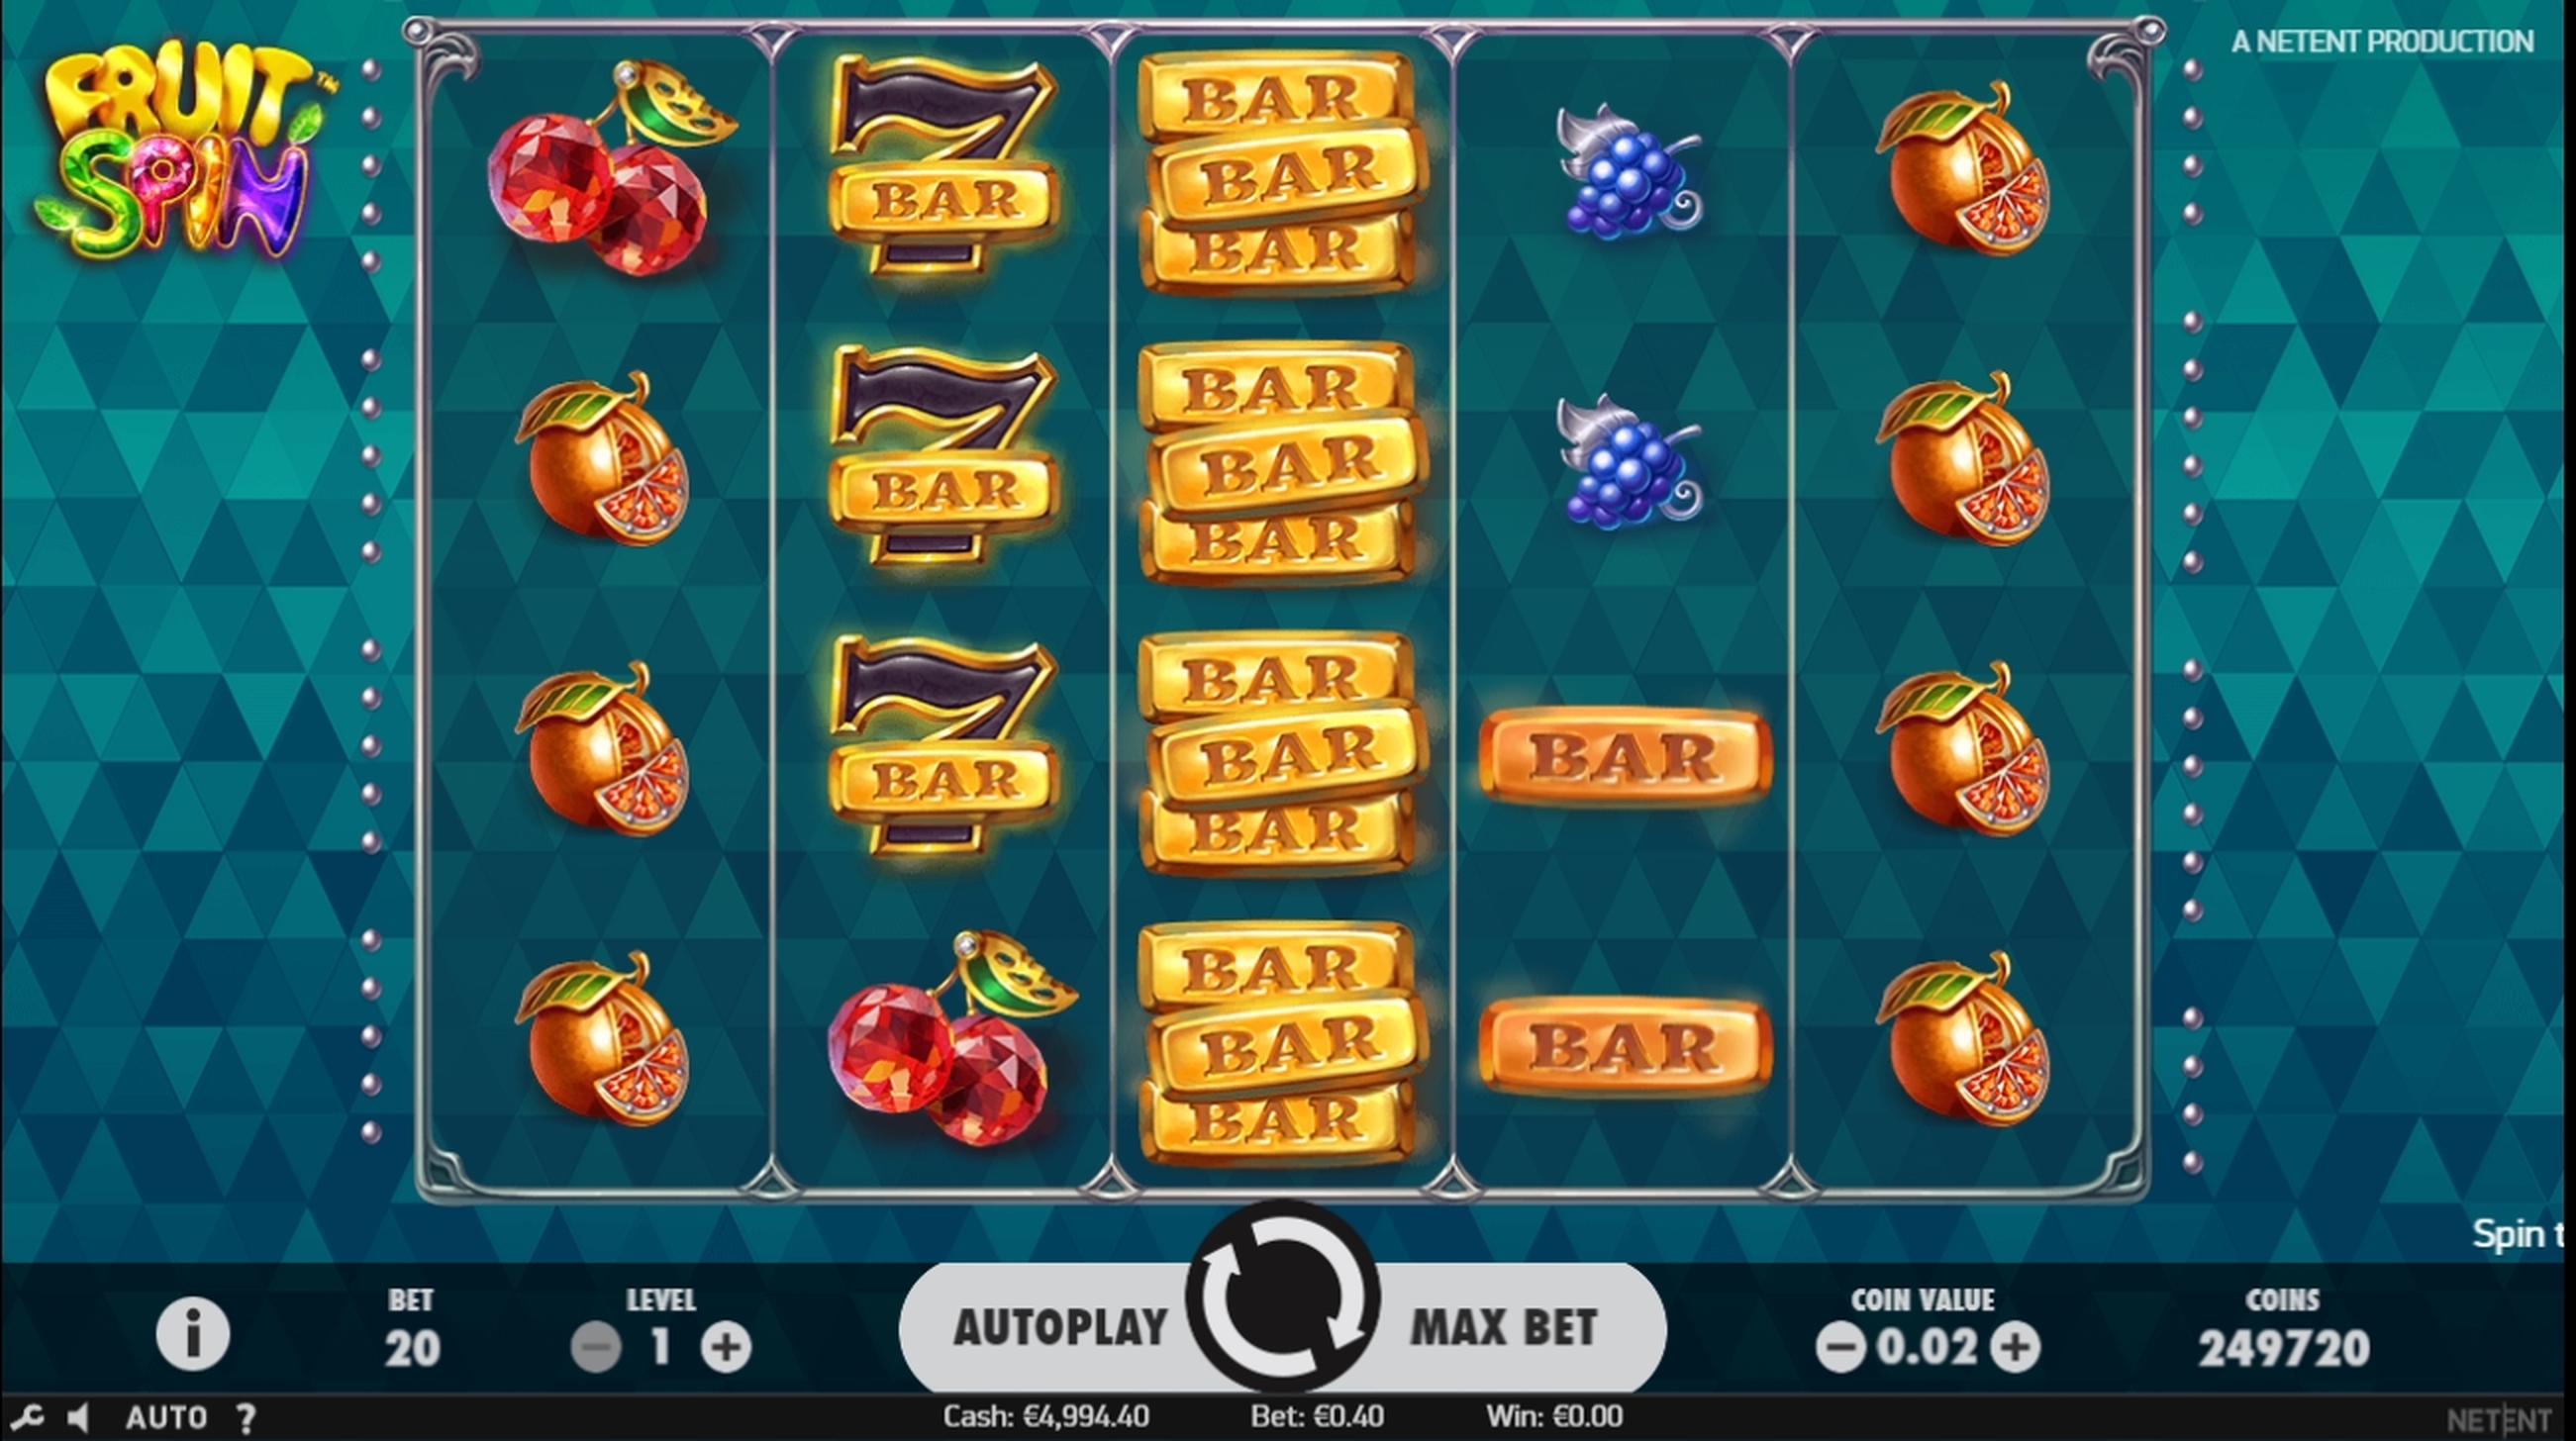 Reels in Fruit Spin Slot Game by NetEnt